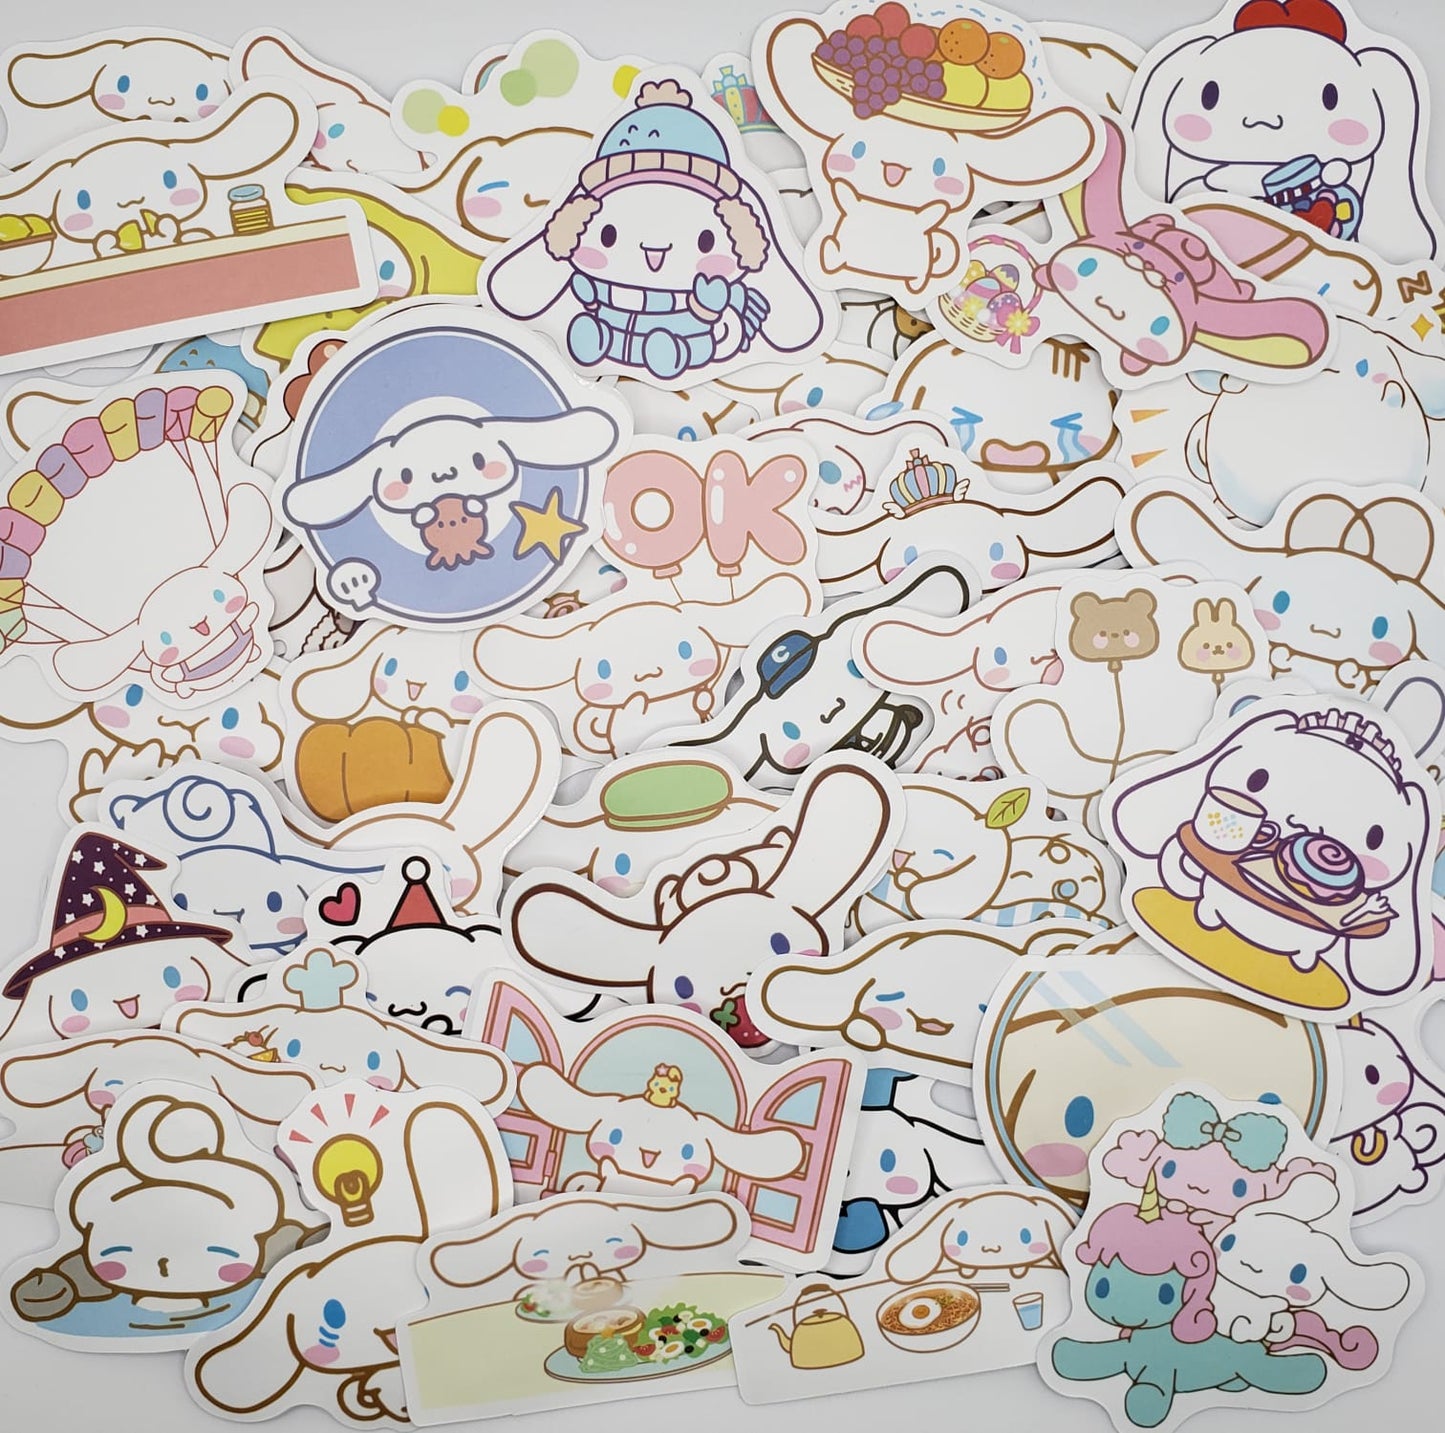 Cinnamon Roll Stickers for Sale